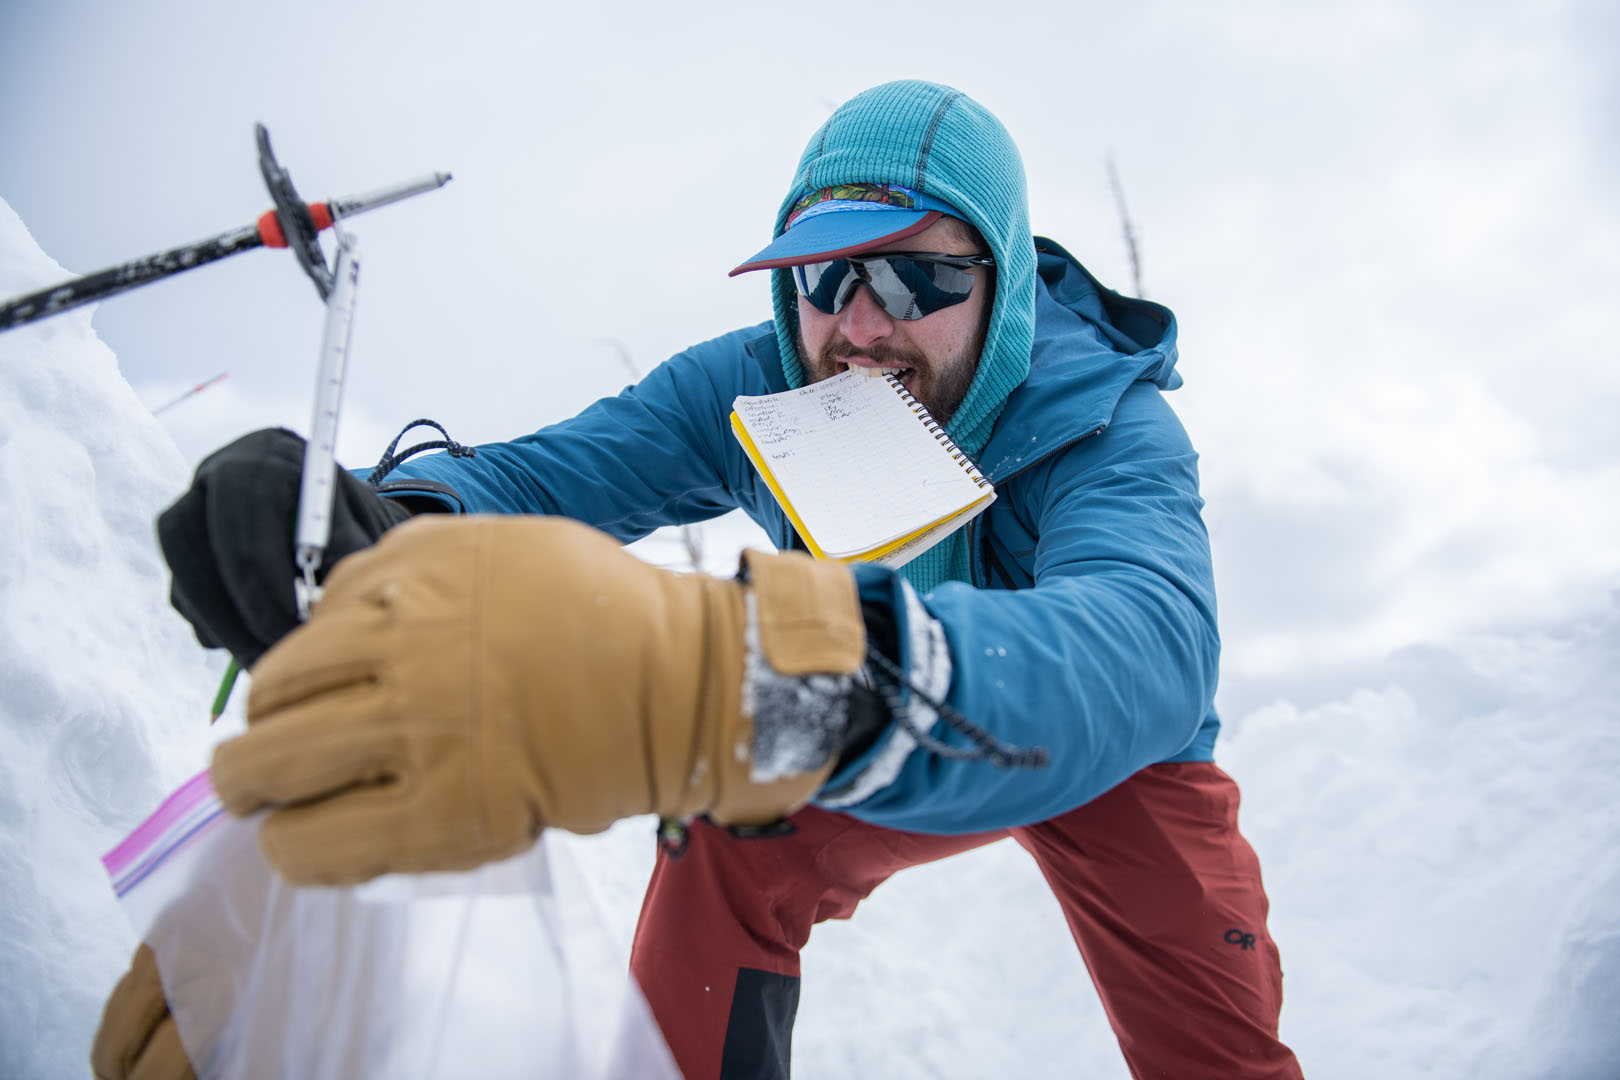 Reuben Alter '24 is pictured weighing a snowpack sample. This weight was later  used to calculate snow density, snow water equivalent (SWE), and snow liquid ratio (SLR), which are three important metrics used in snow science. Photo by Matthew Silverman '23. 